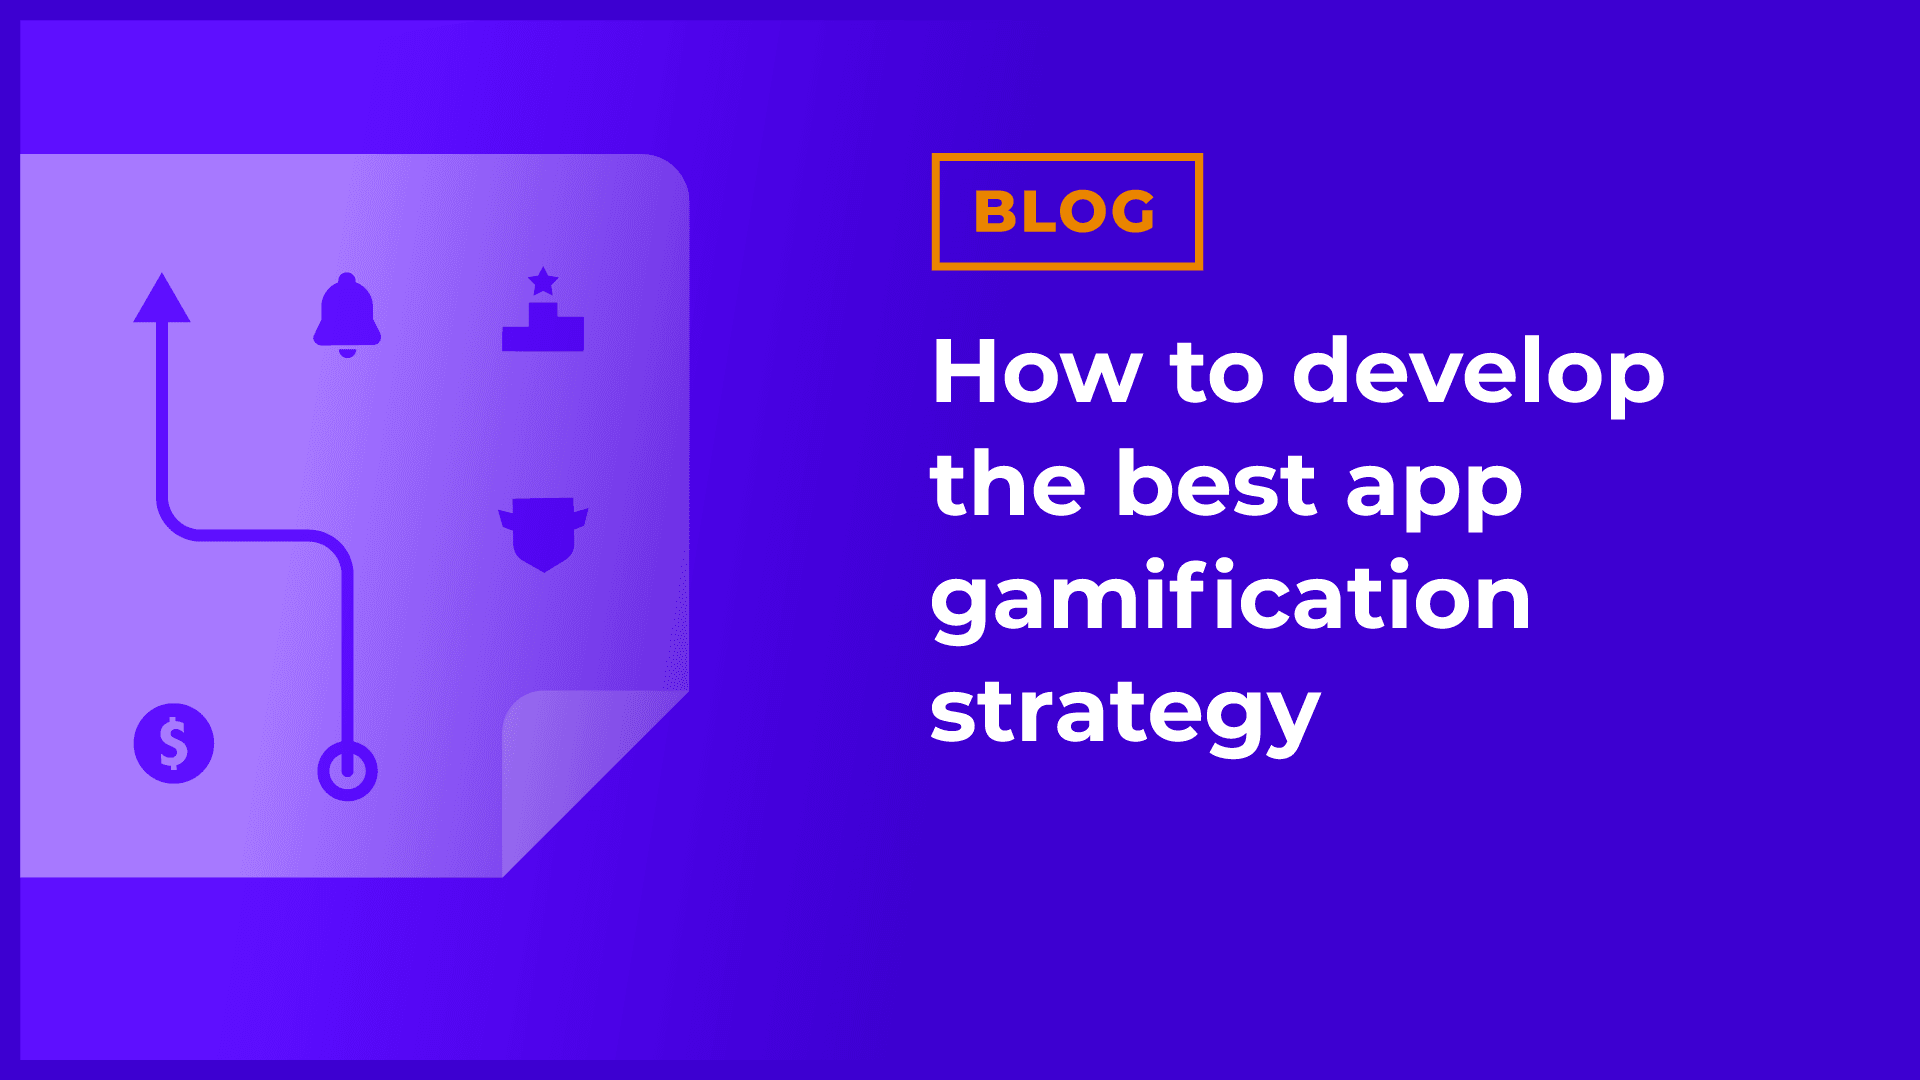 How to develop the best app gamification strategy - everything you need to know!